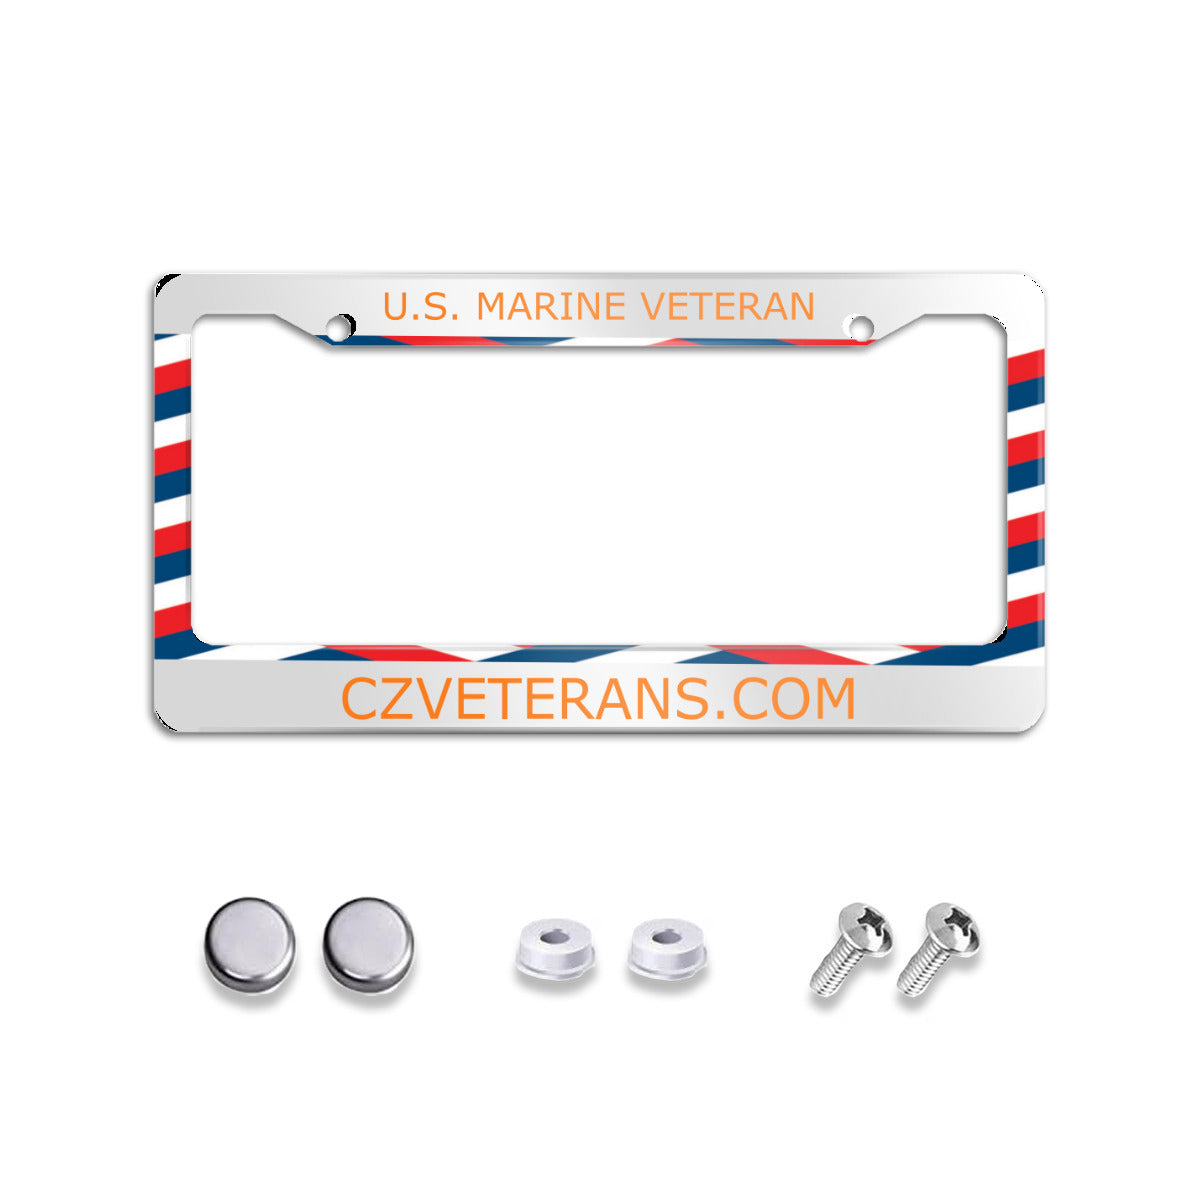 Standard 2-hole U.S. License plate cover - U.S. Marine - SHIPPING INCLUDED